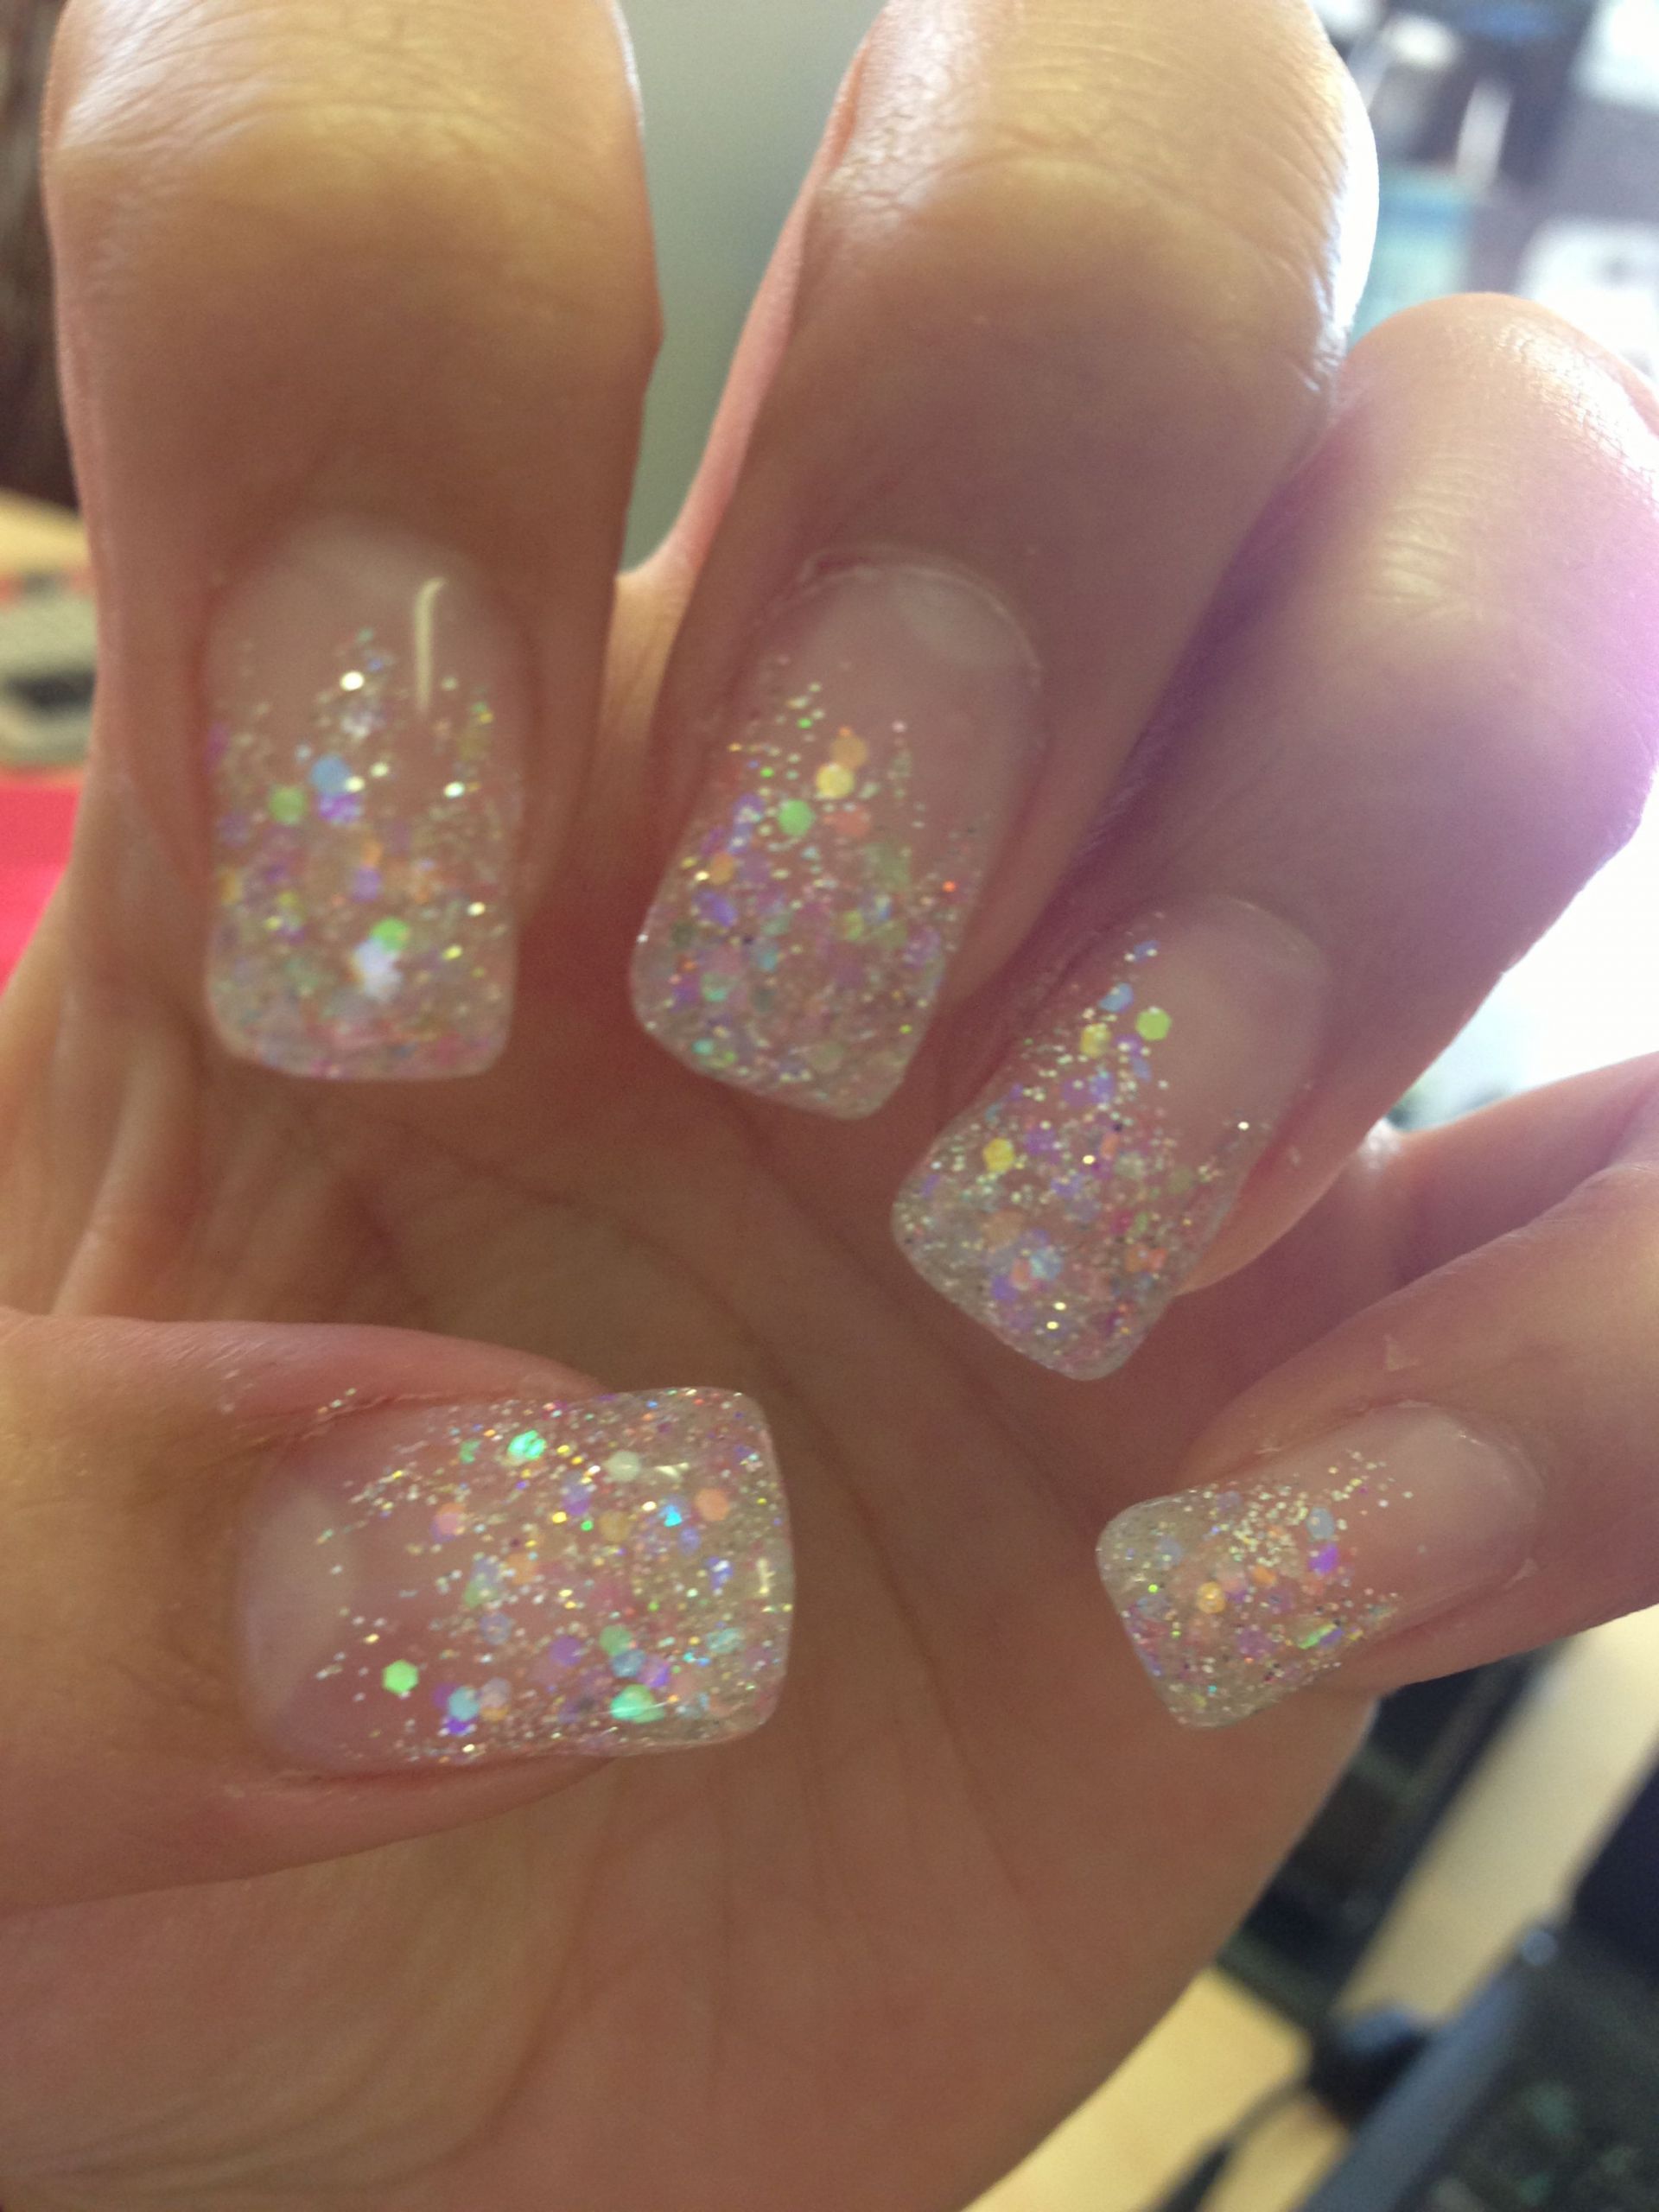 Glitter Gel Nails Pictures
 Pin by Carina Hinojosa on Things I love